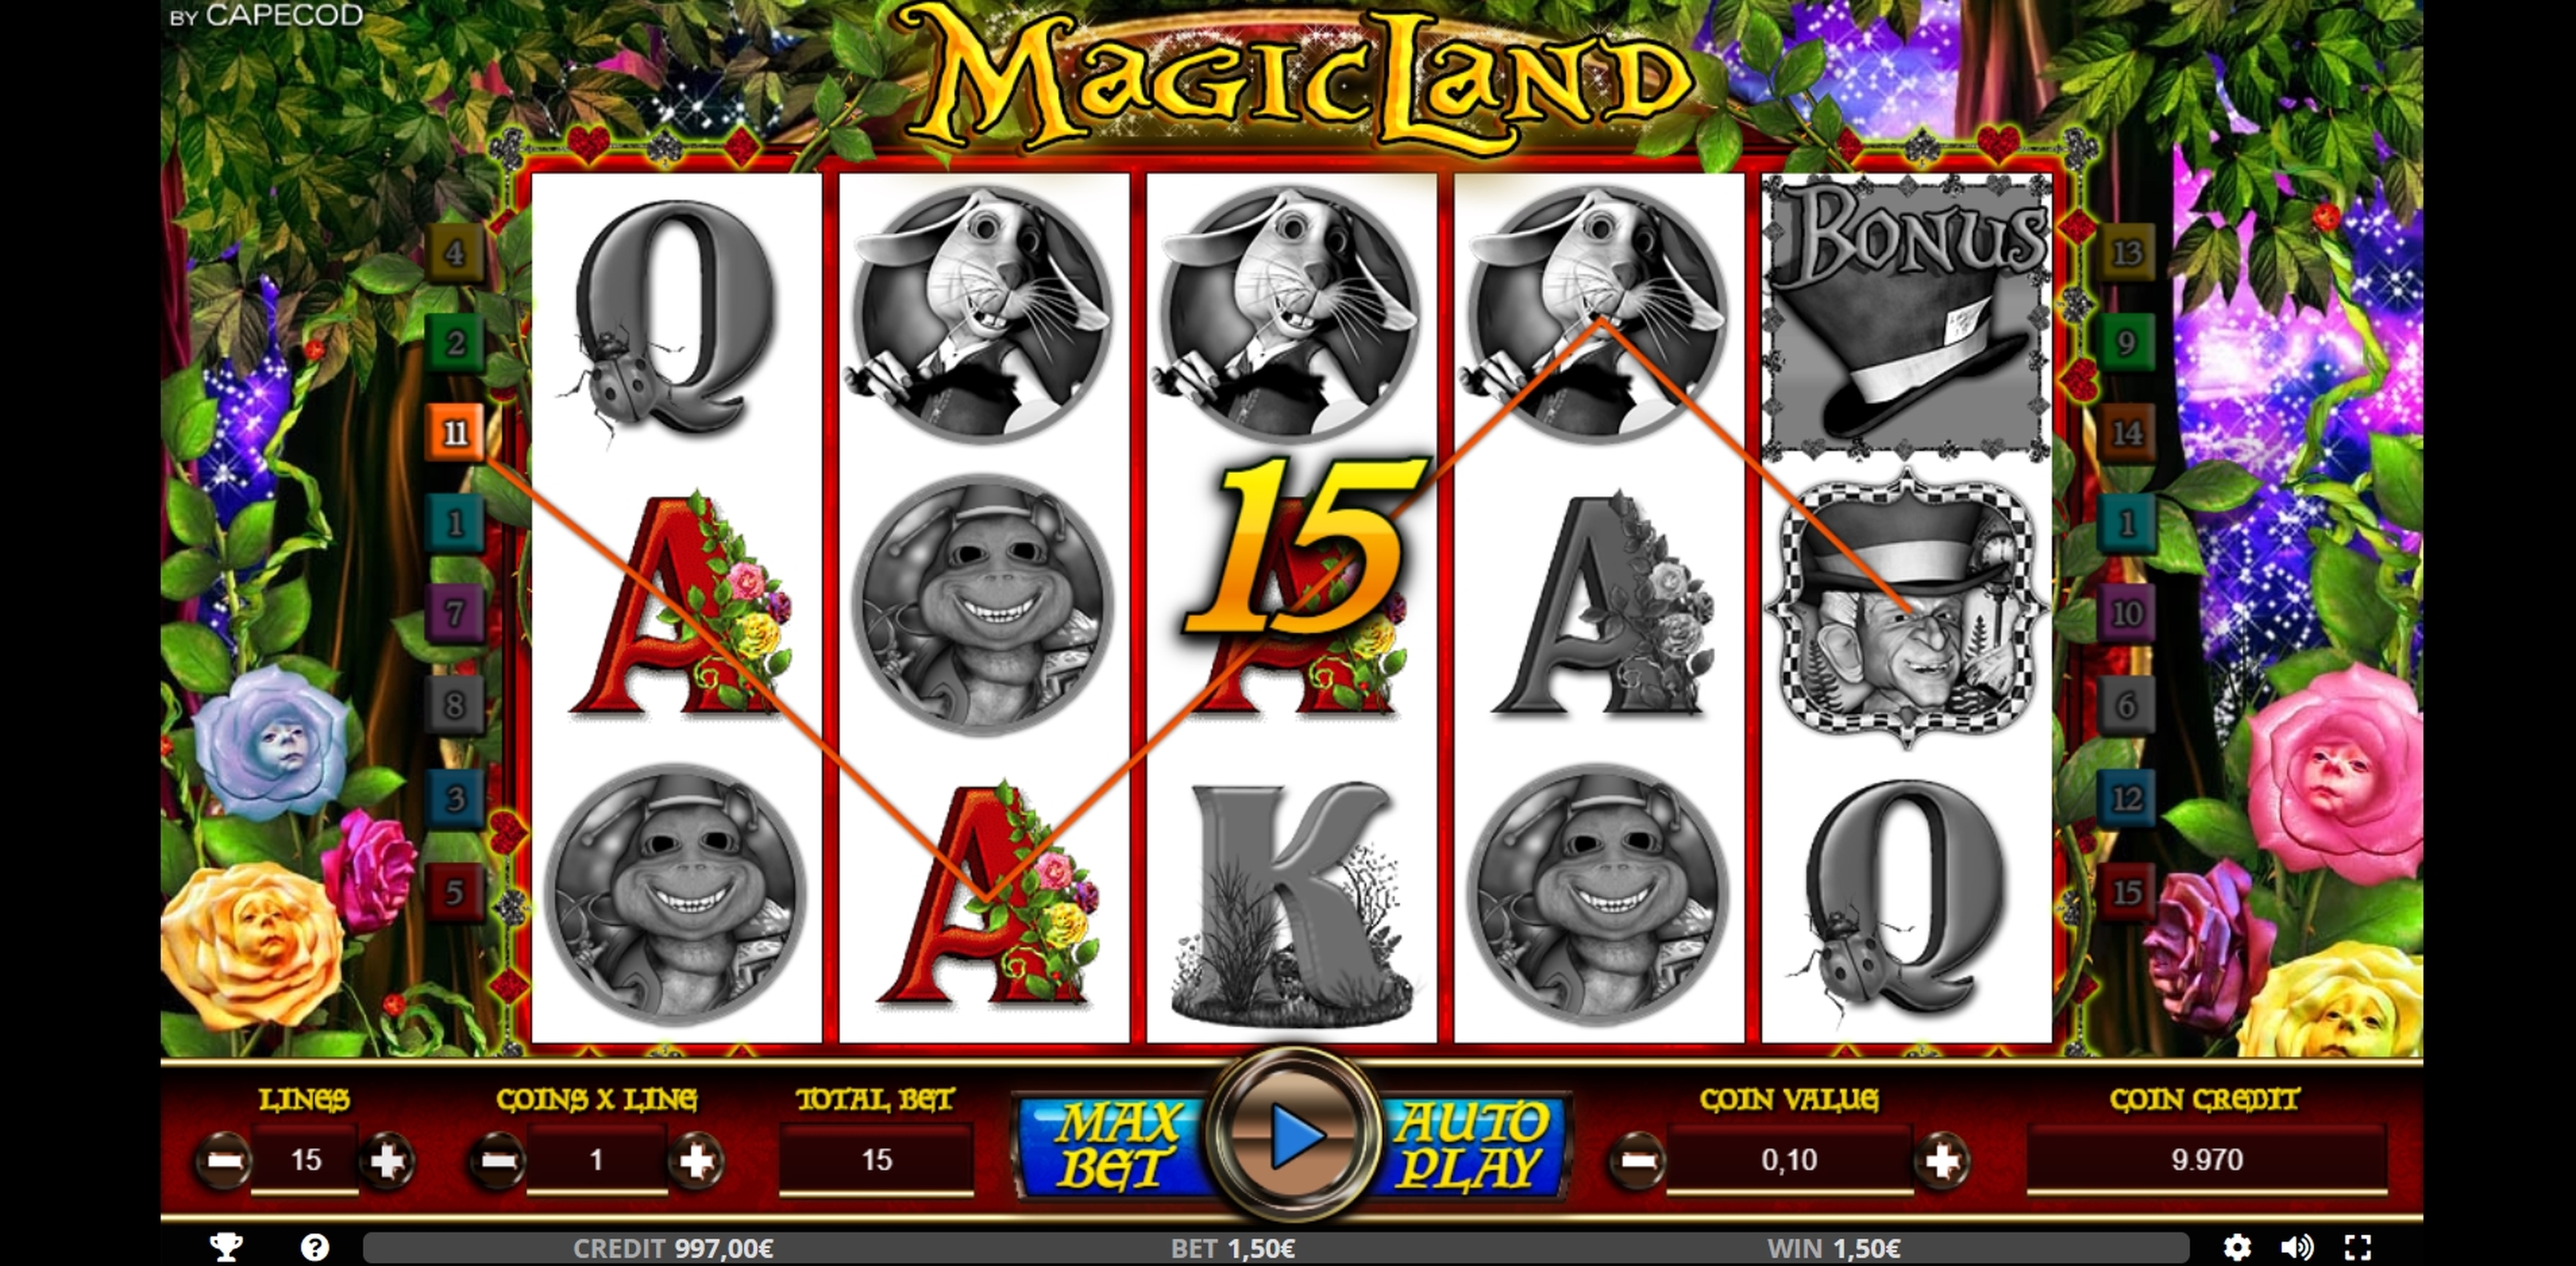 Win Money in MAGICLAND Free Slot Game by Capecod Gaming